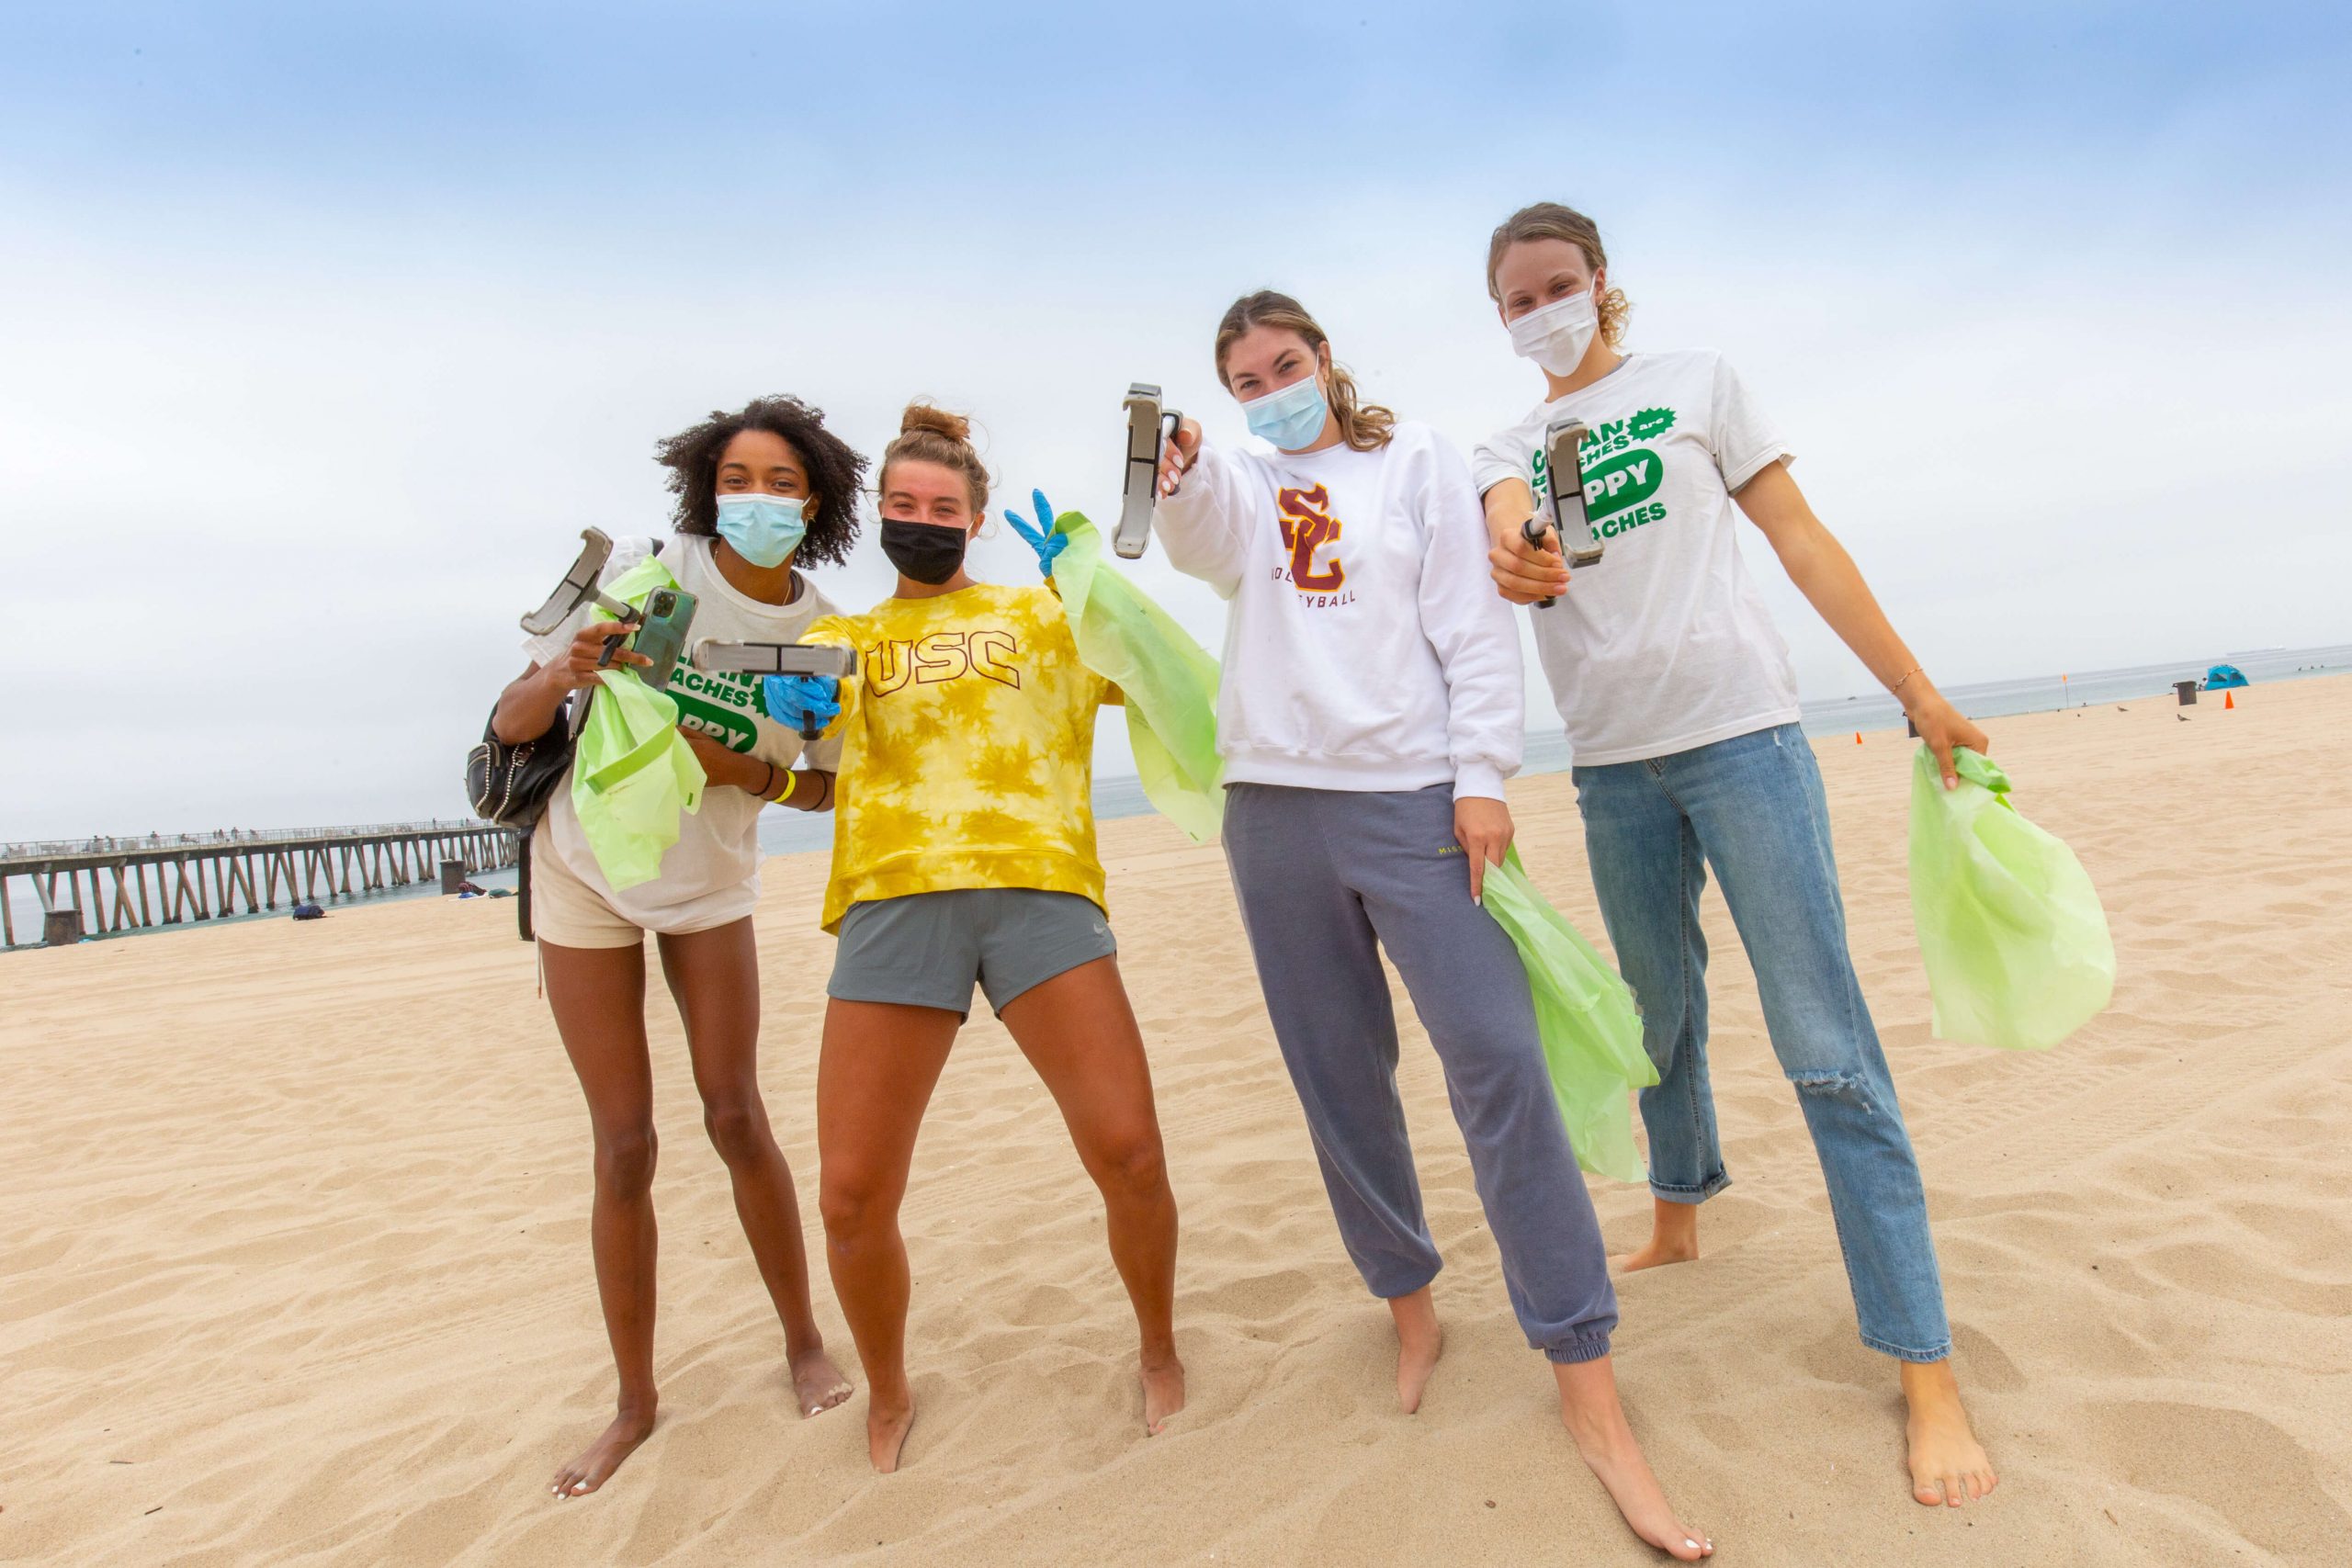 a group of students holding green trash bags and trash scoopers poses together on a beach